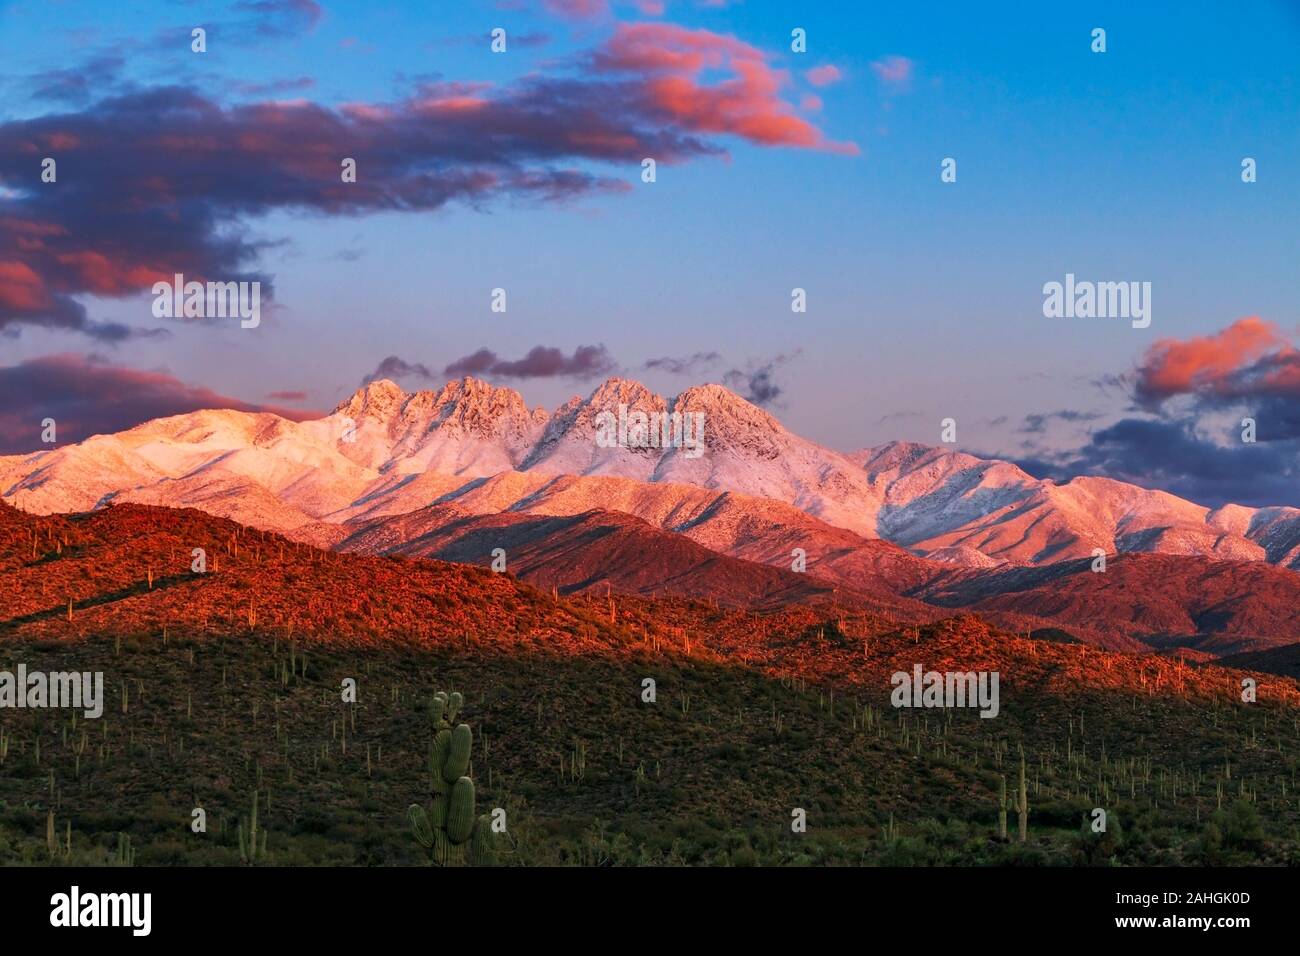 Sunset Image of the Snow covred Four Peaks Mountain Range Outside Phoenix AZ after storm Stock Photo